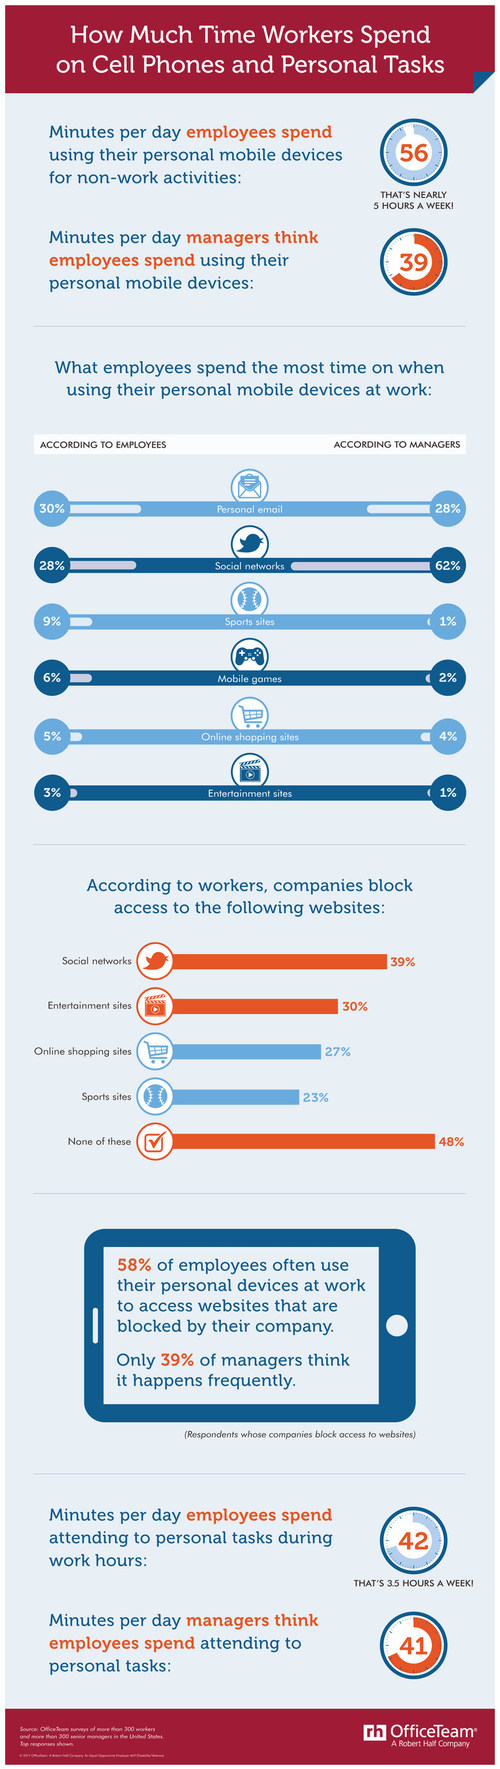 Workers surveyed by OfficeTeam said they squander an average of 56 minutes per day using their mobile device for non-work activities in the office. Professionals also admitted to clocking 42 minutes a day on personal tasks. All in all, the average employee could be wasting more than 8 hours per week on activities unrelated to the job!